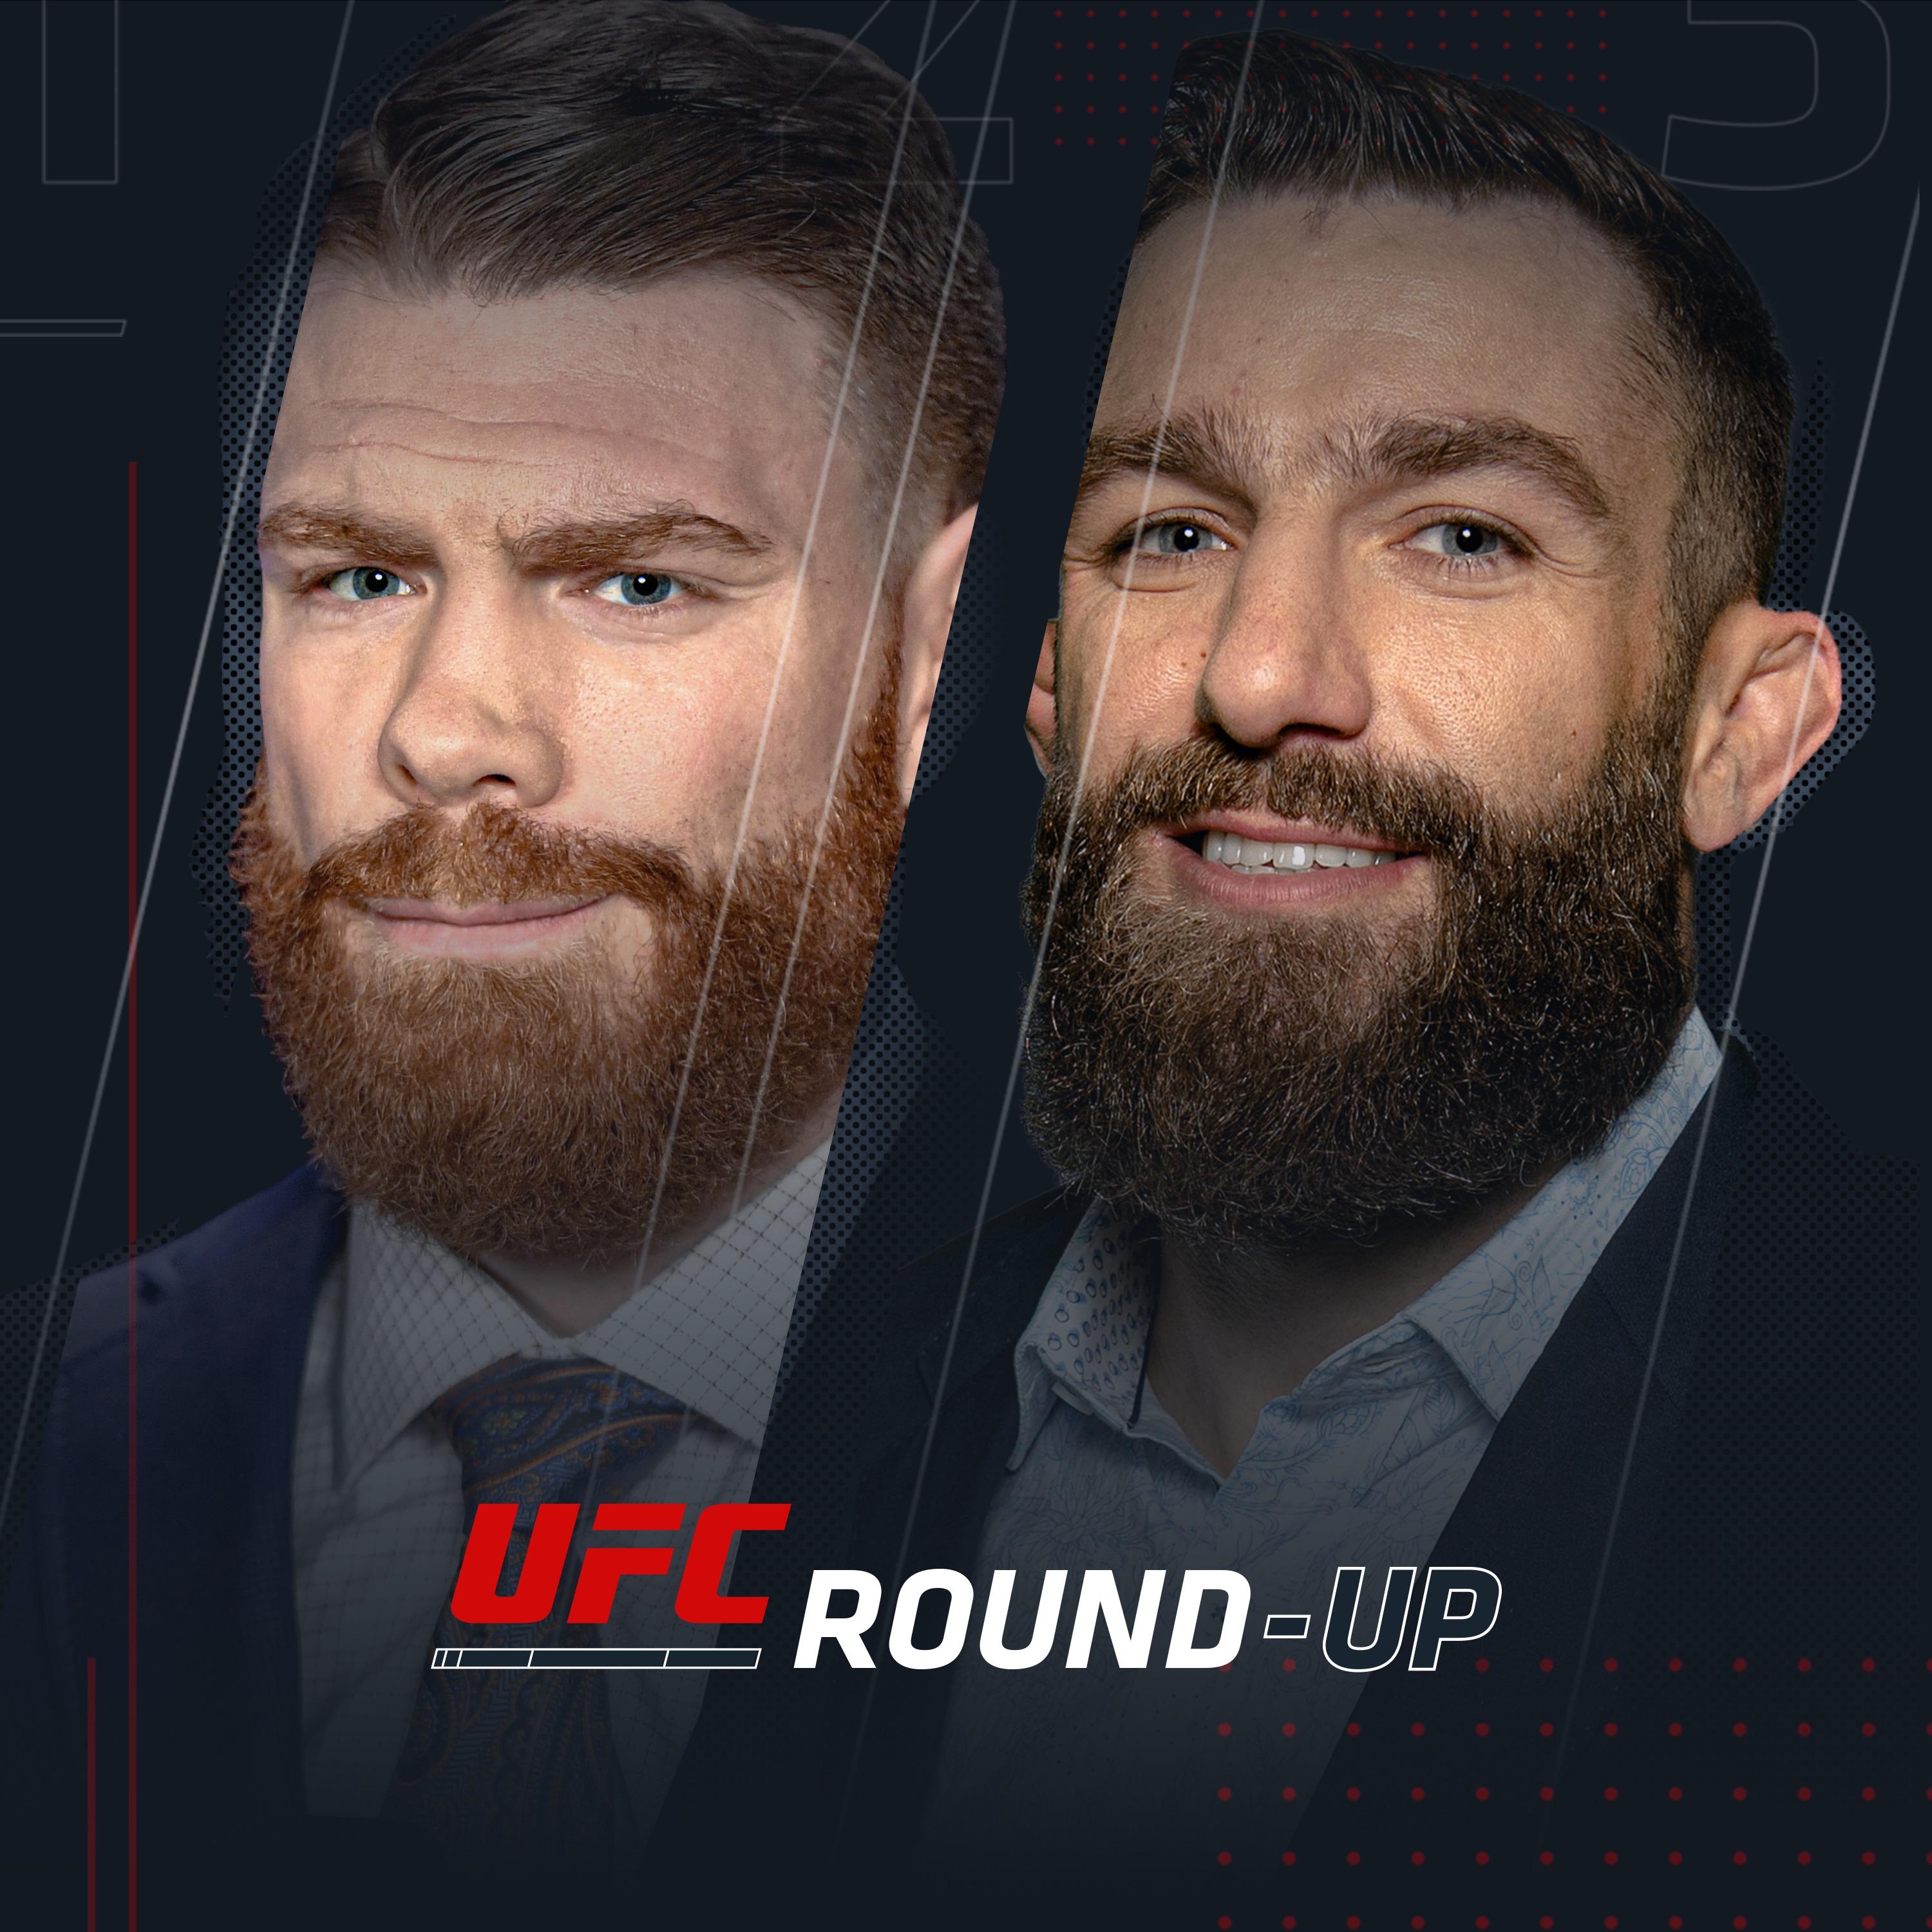 Show poster of UFC Round Up with Paul Felder & Michael Chiesa